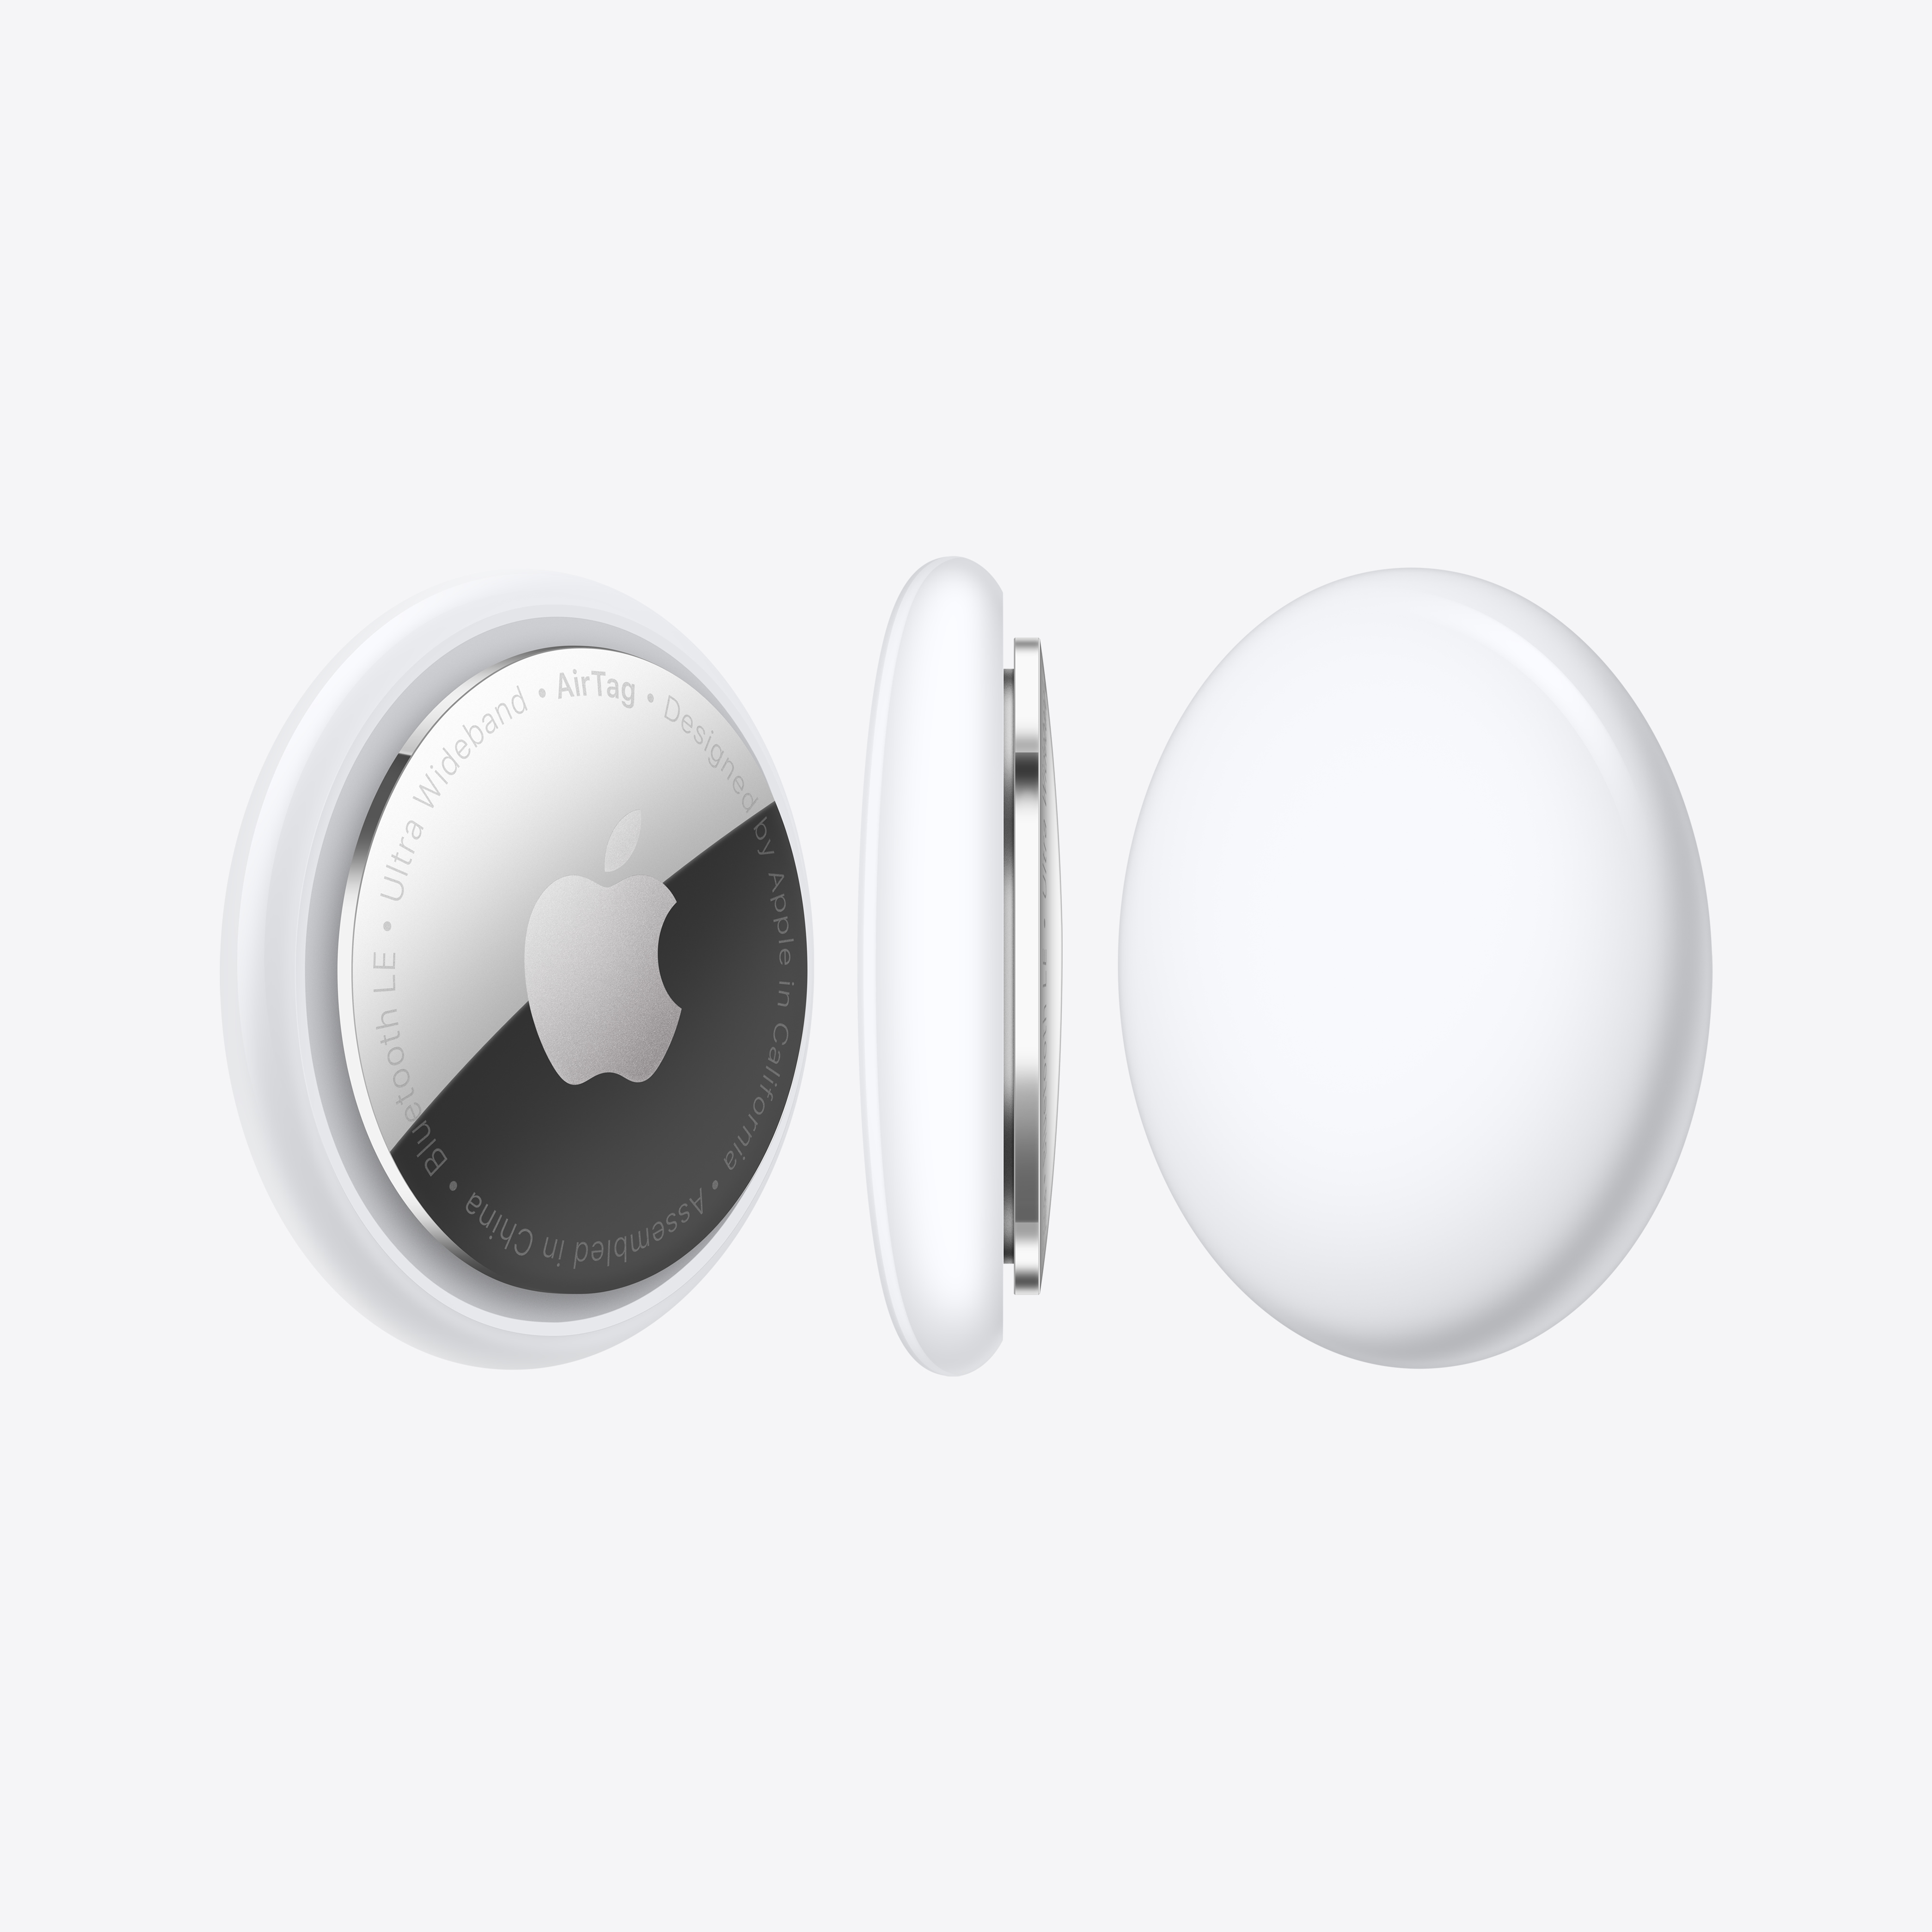 Apple AirTag - 4 Pack - image 3 of 11